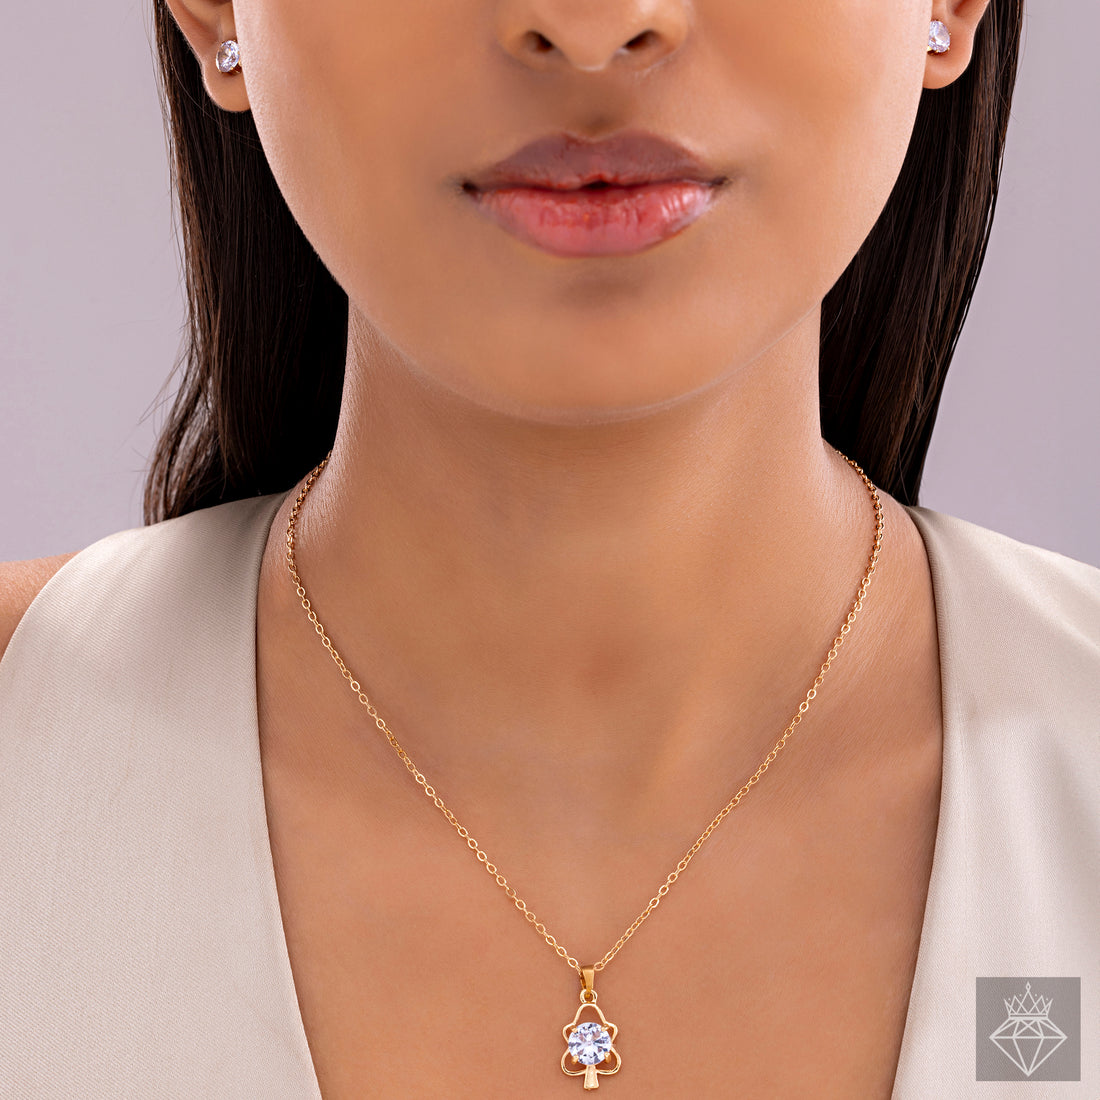 PRAO Crystal Solitaire Necklace Set With Earrings